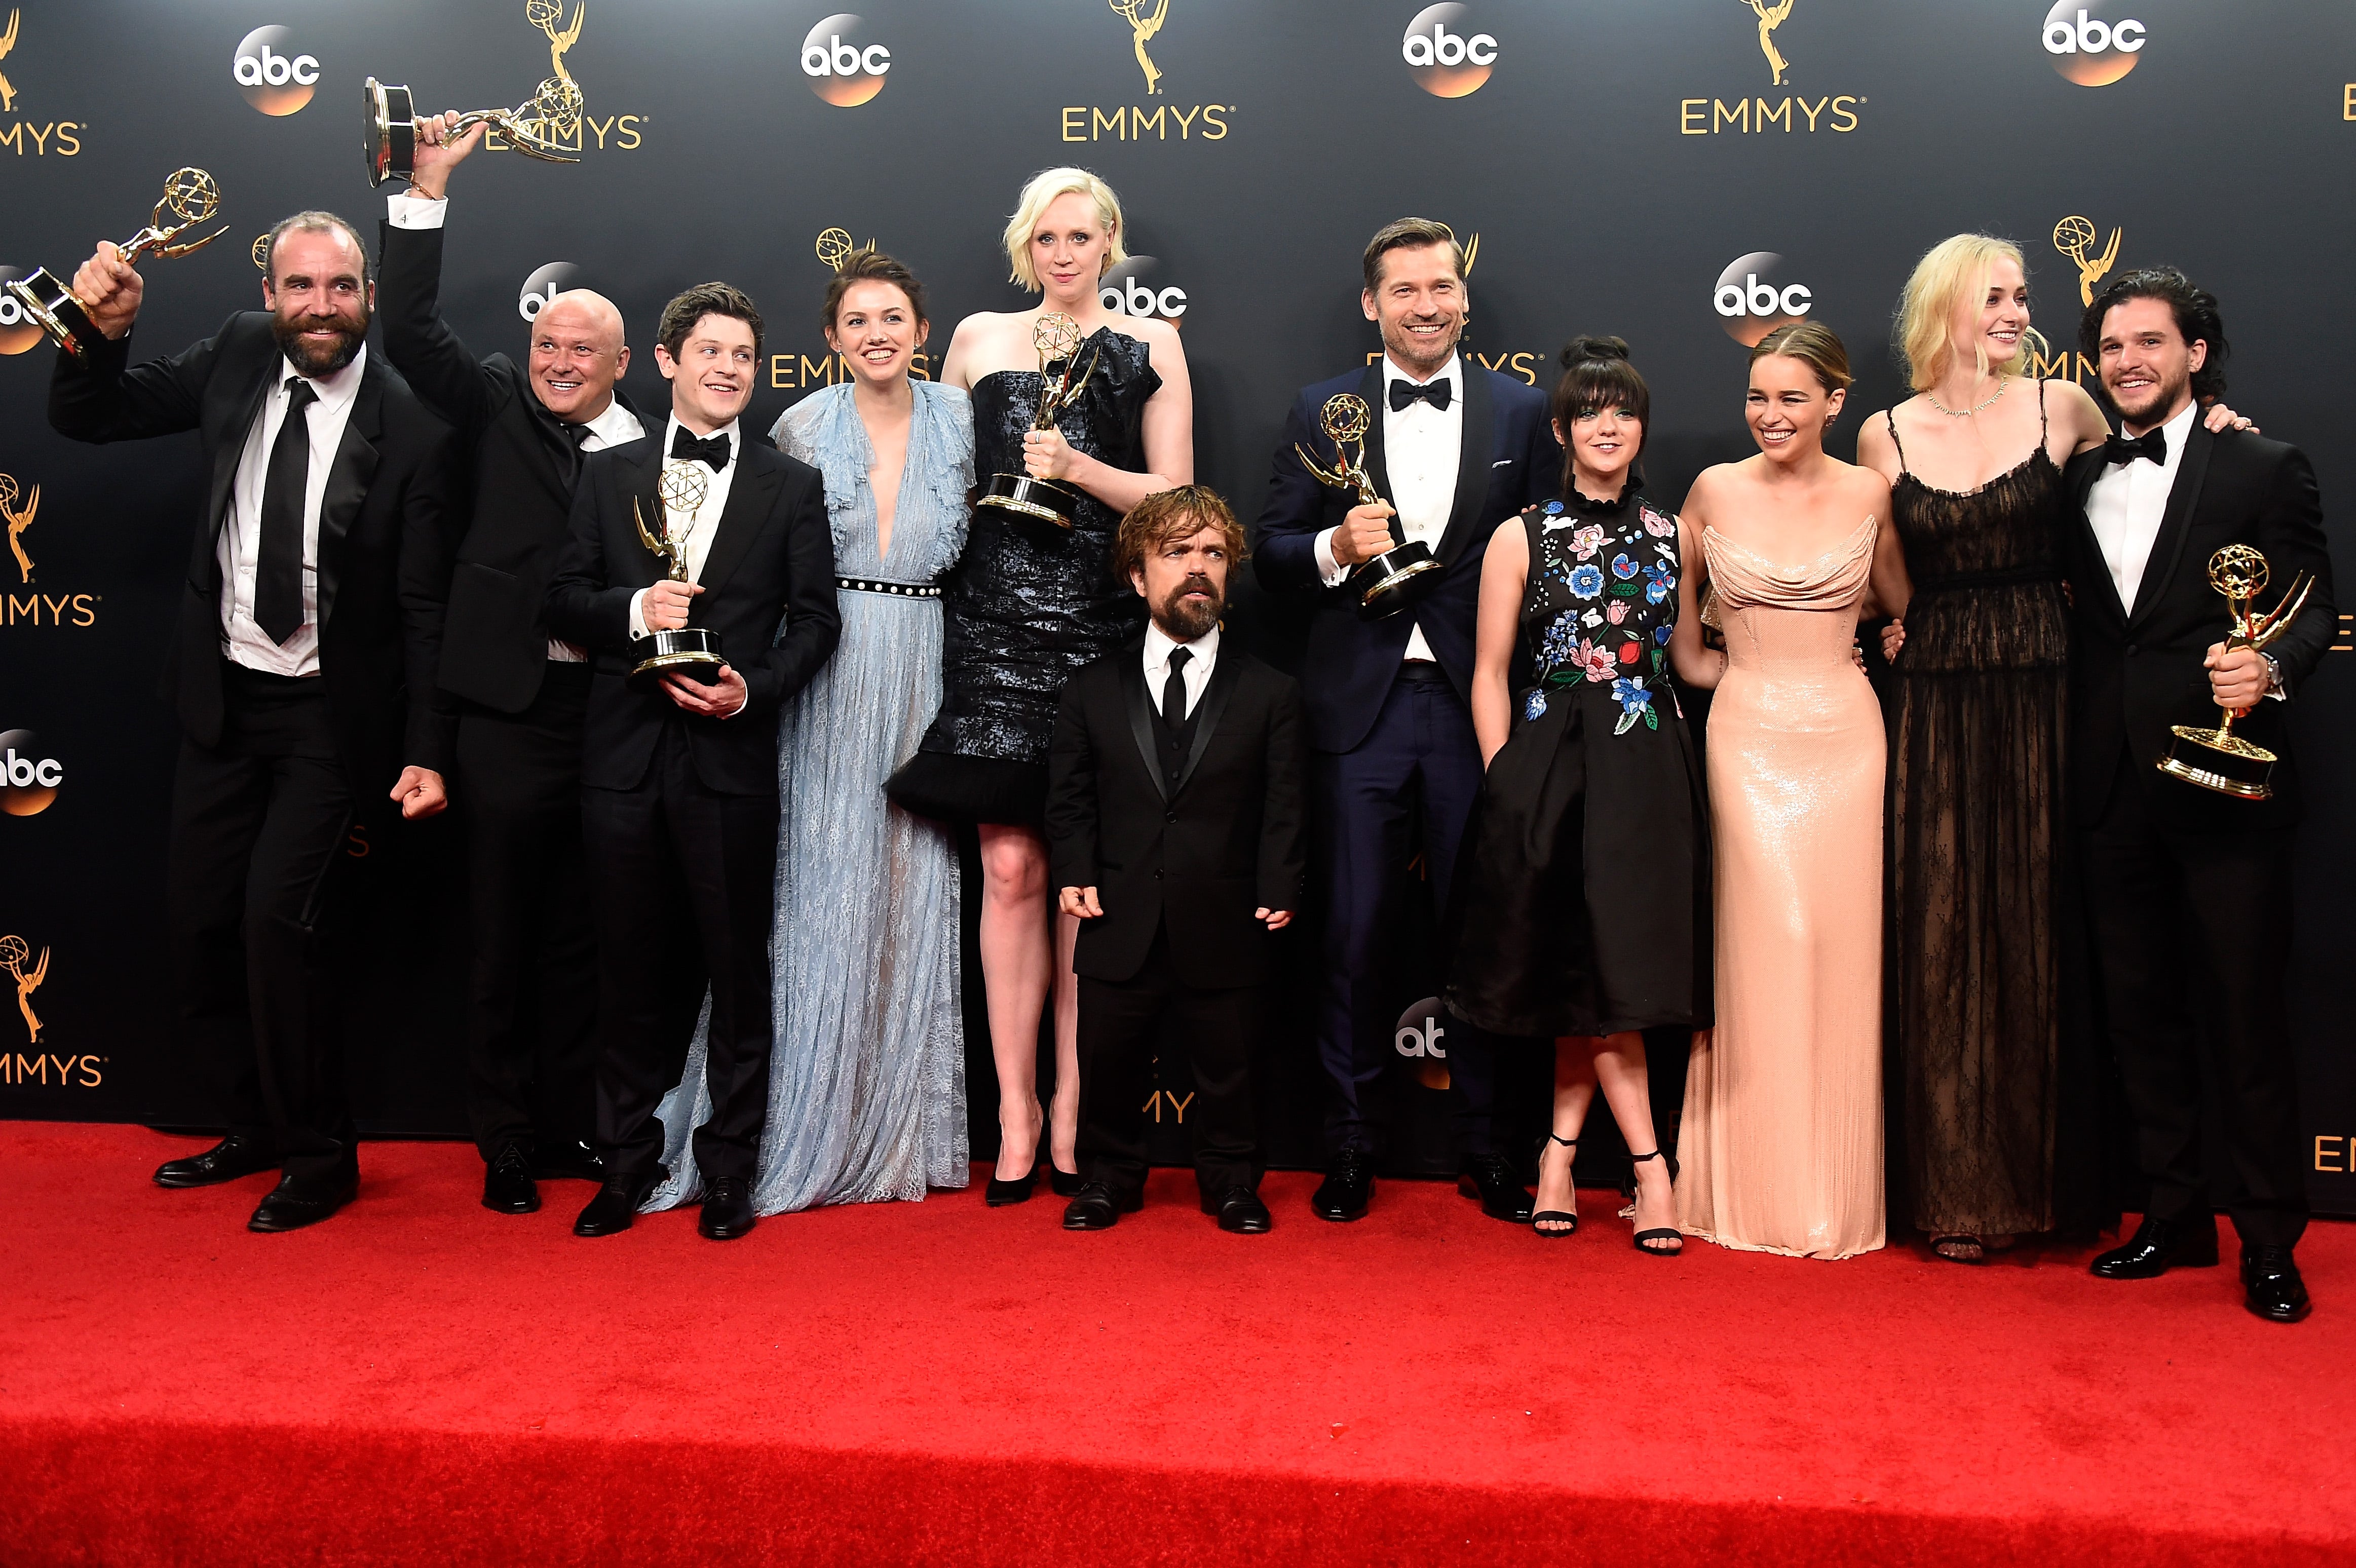 Emmys 2019: 'Game of Thrones' Stars' Red Carpet Pics